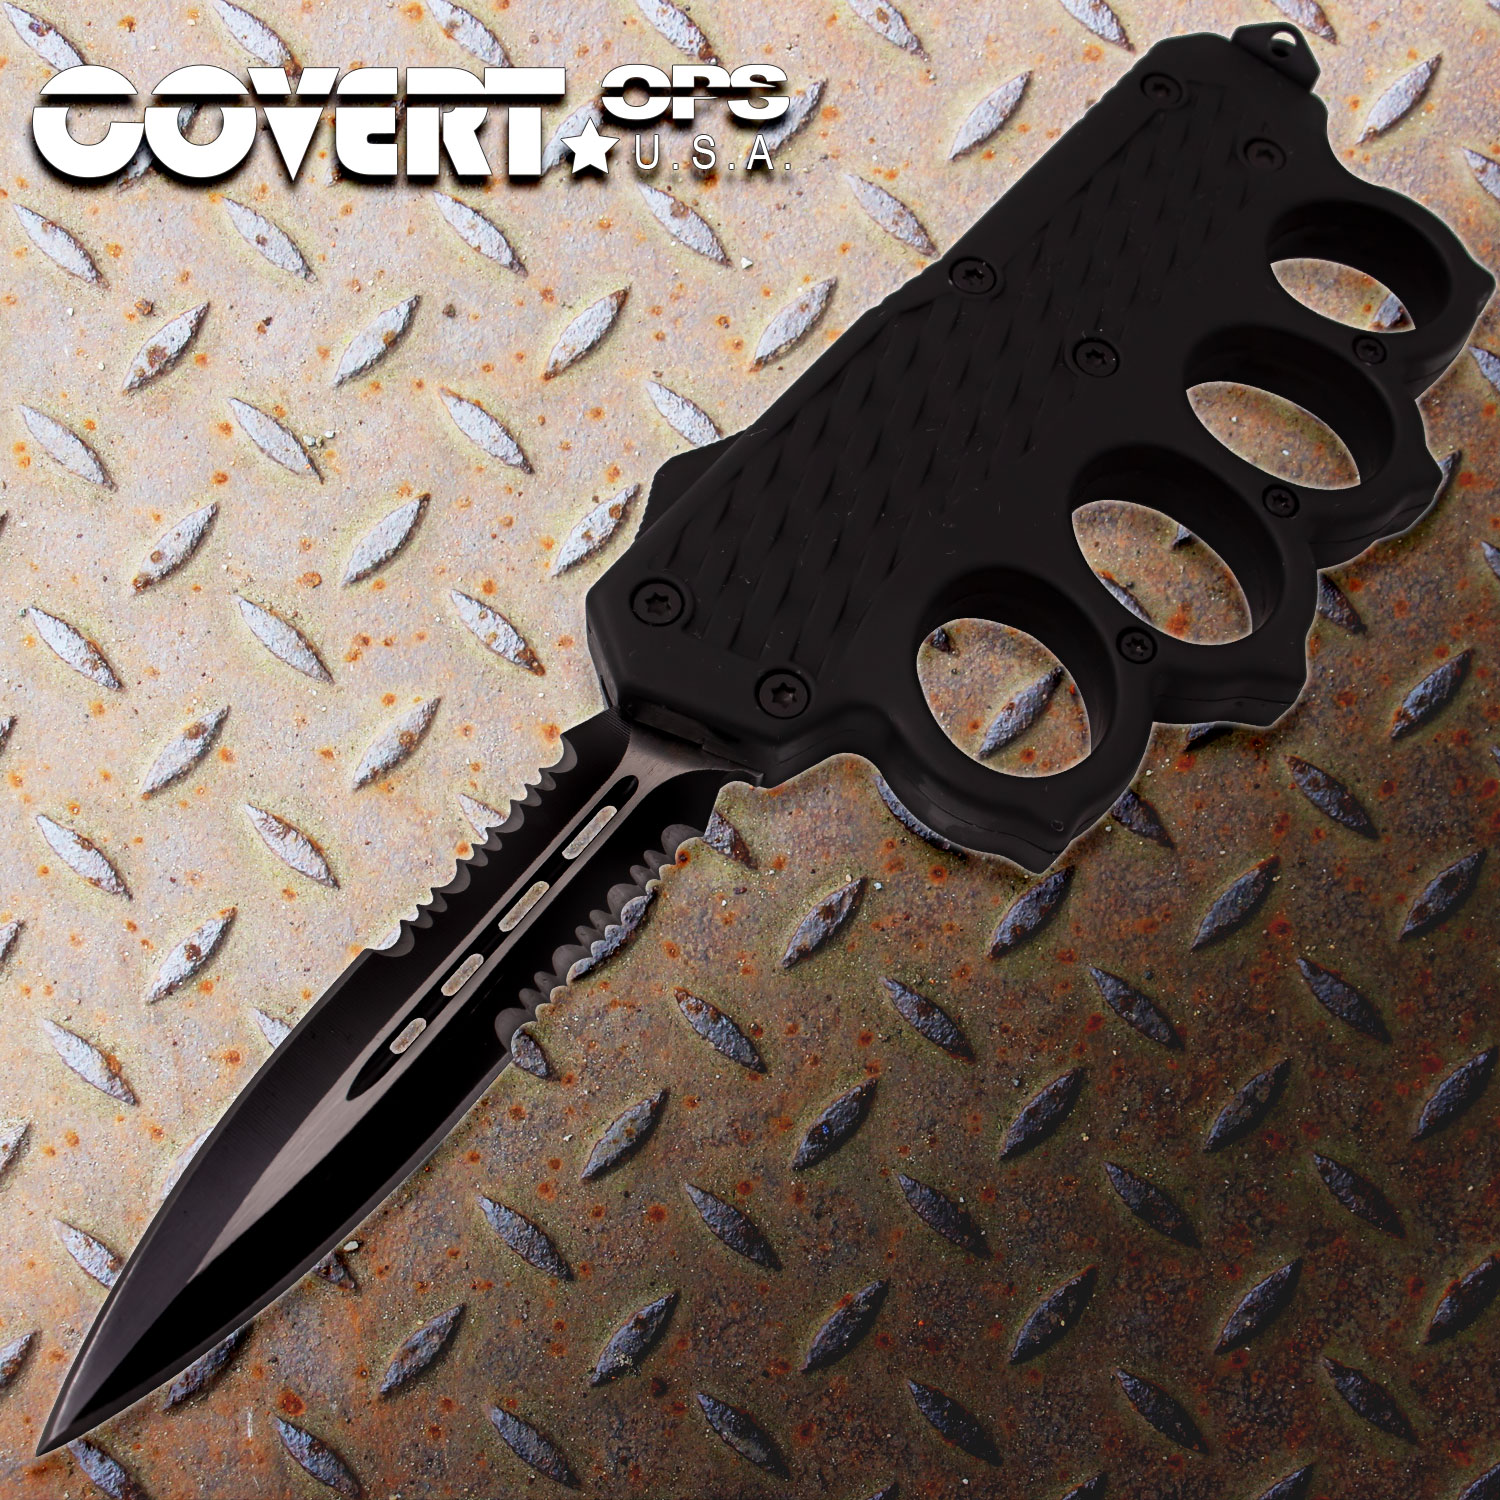 Covert Ops Military Elite Tactical Grip Rubberized OTF Automatic Knuckle Knife Double Serrated Edge Blade